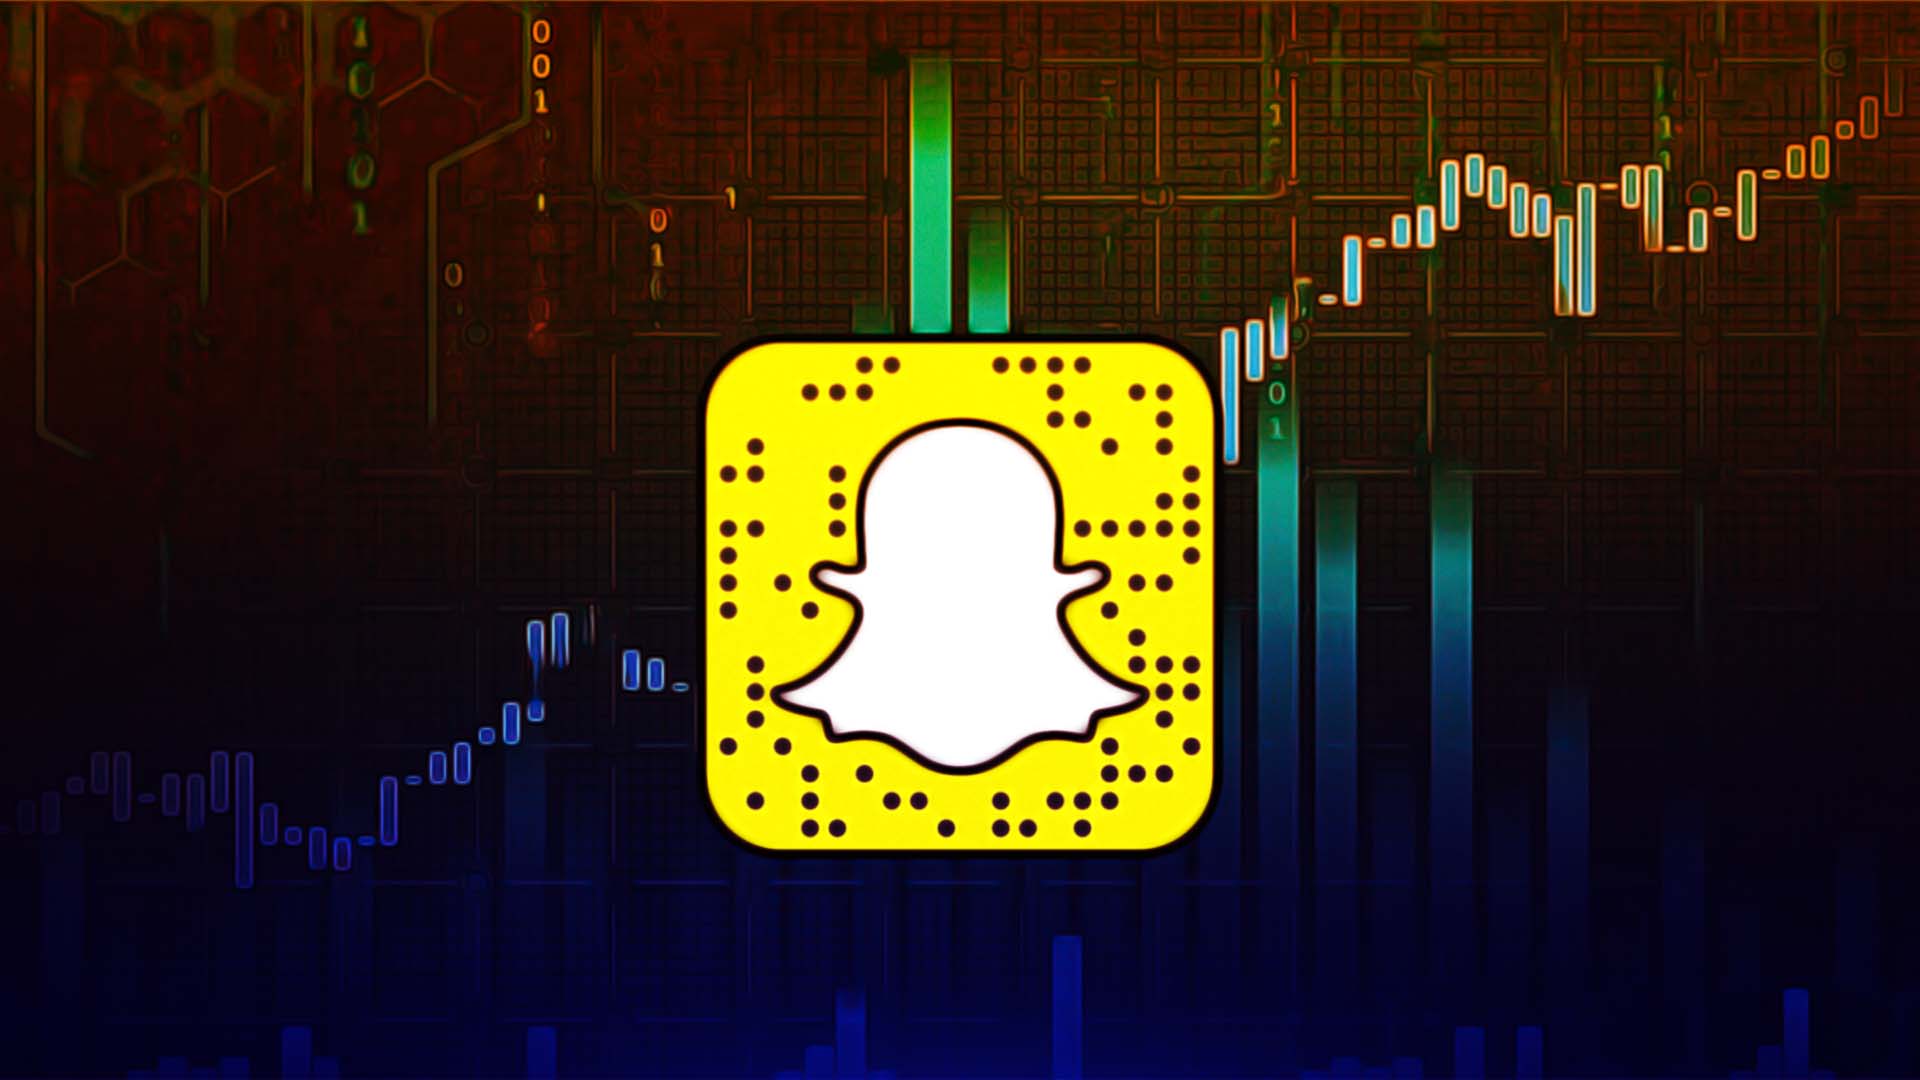 SNAP to maintain high streaks— holders to get rising prices as rewards